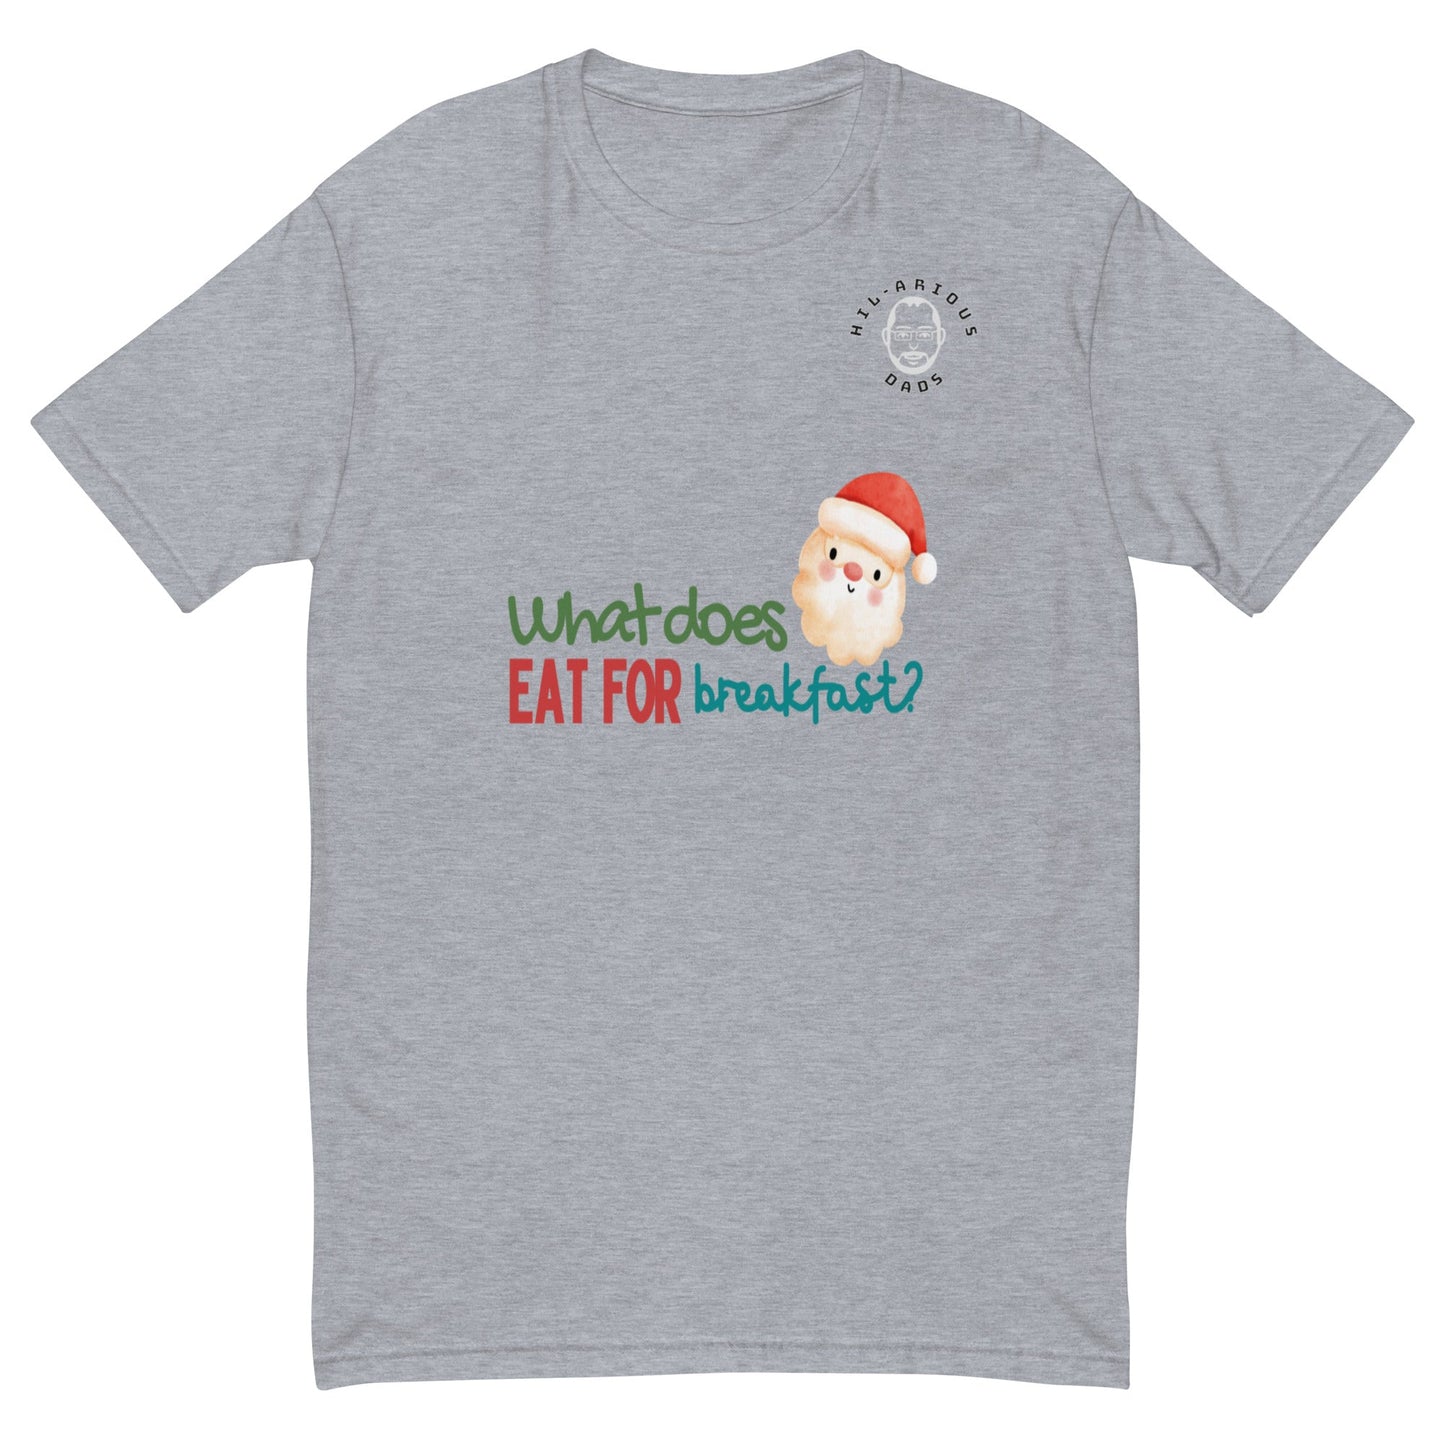 What does Santa eat for breakfast?-T-shirt - Hil-arious Dads